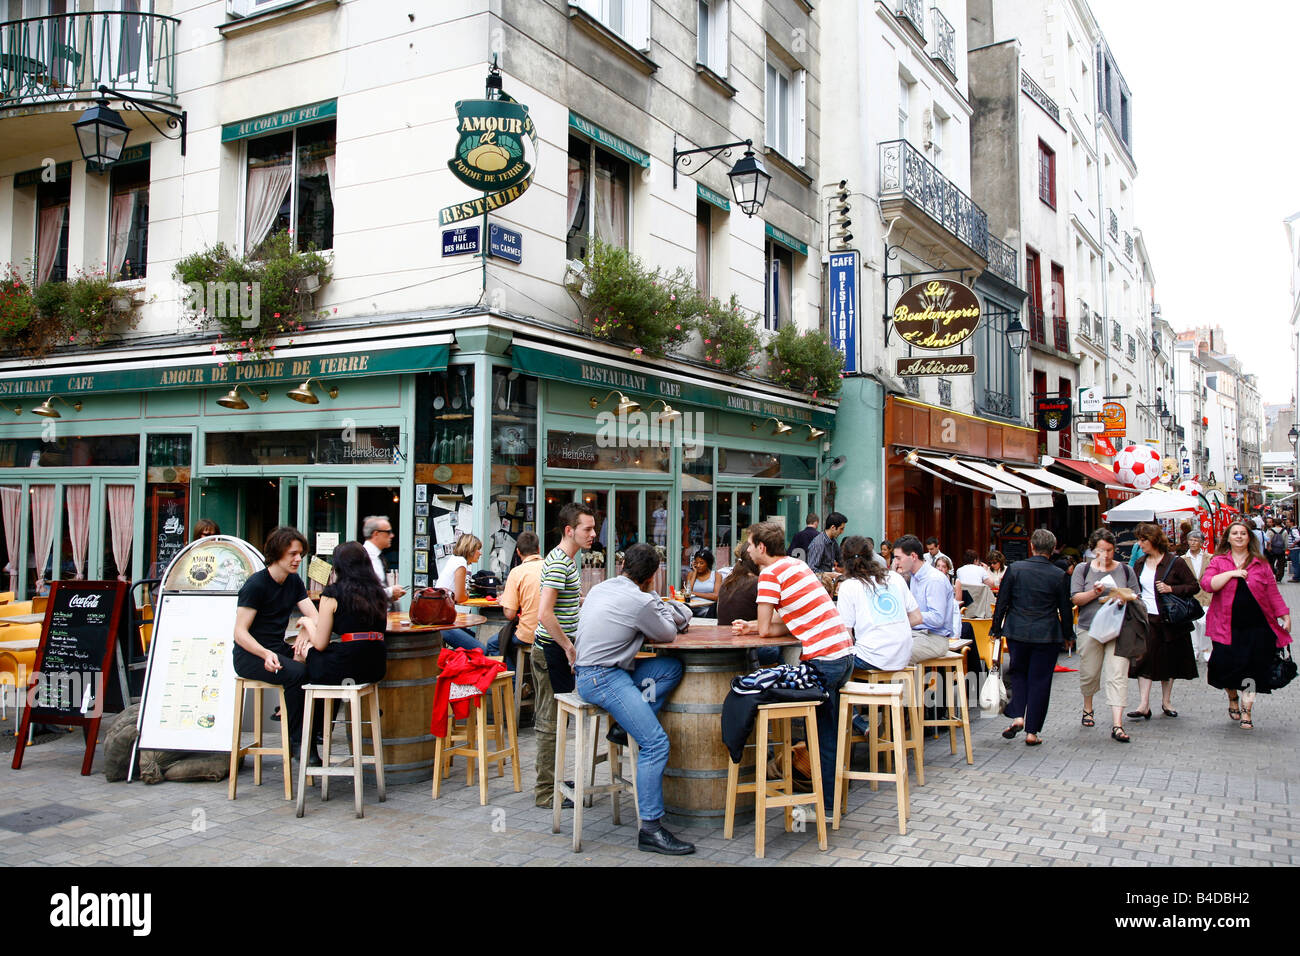 July 2008 - People sitting at an outdoors cafe in a pedestrian street Nantes Brittany France Stock Photo